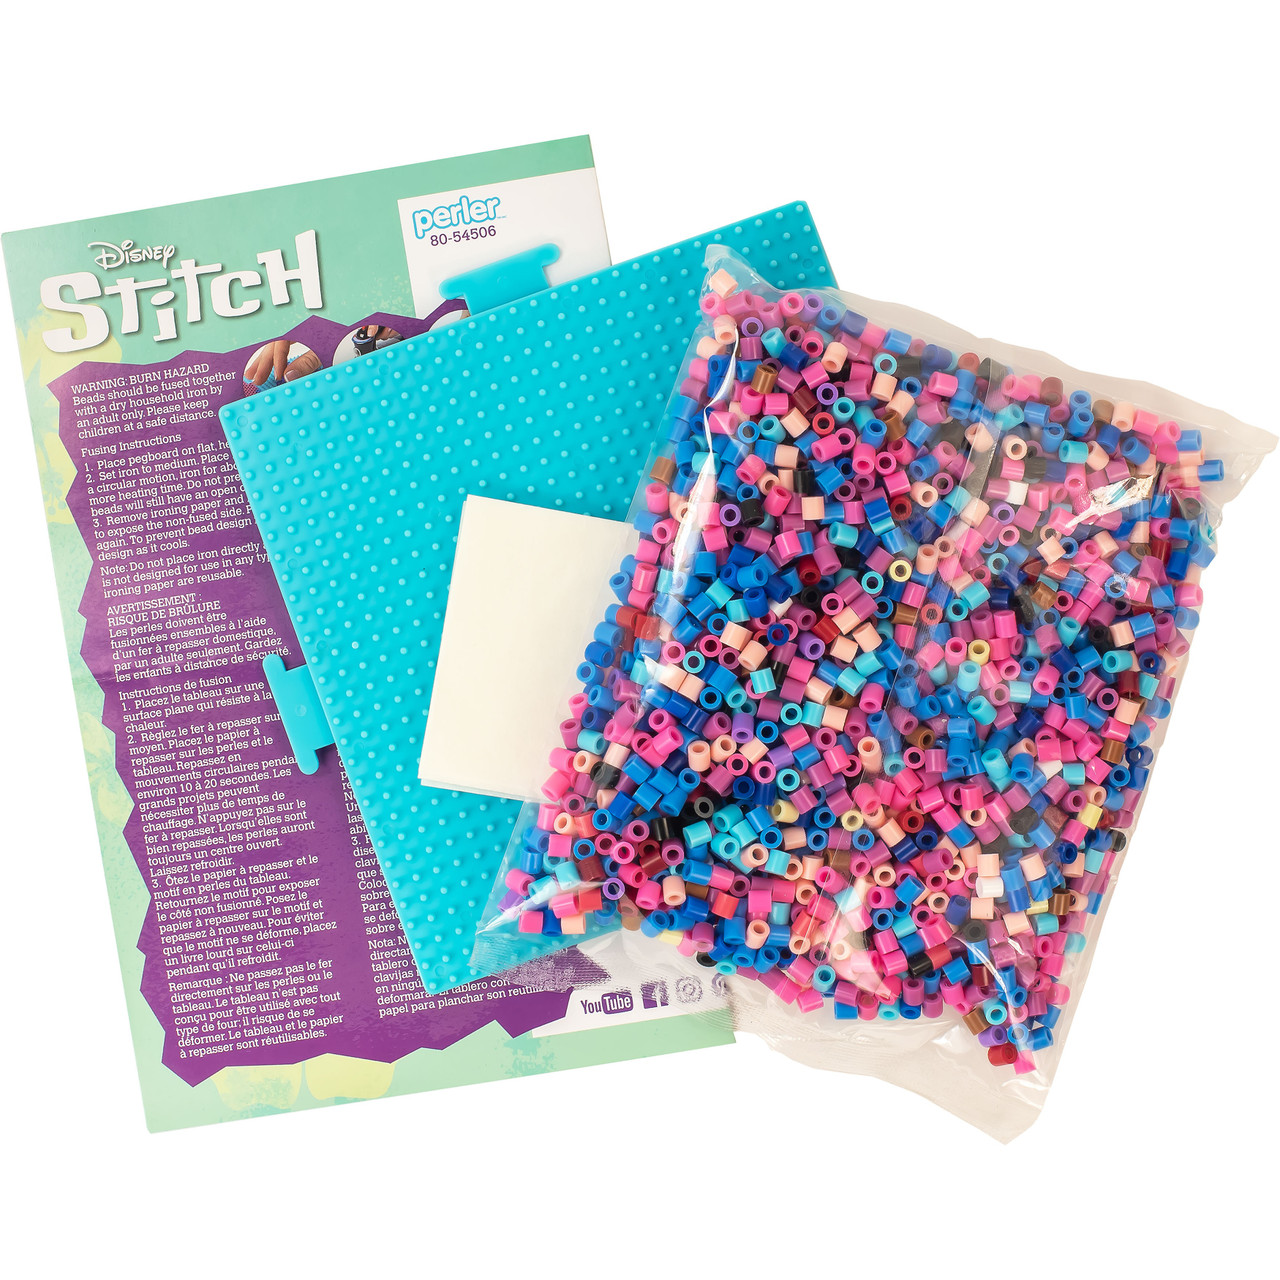 Hama Beads Toy 20 Colors Fuse Beads Kit Melty Fusion Colored Beads